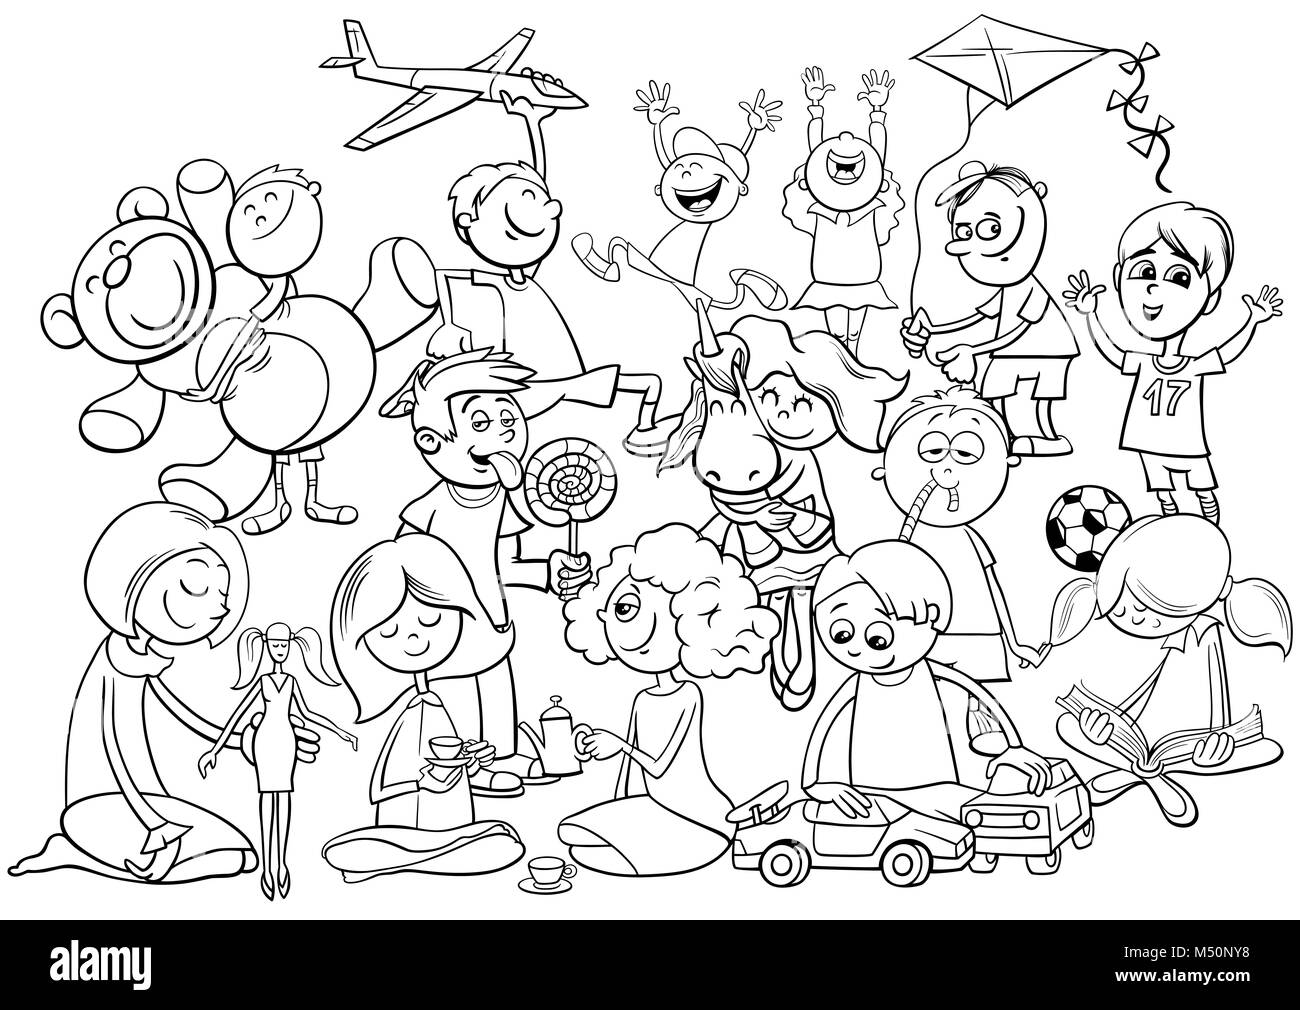 playful children group coloring book Stock Photo